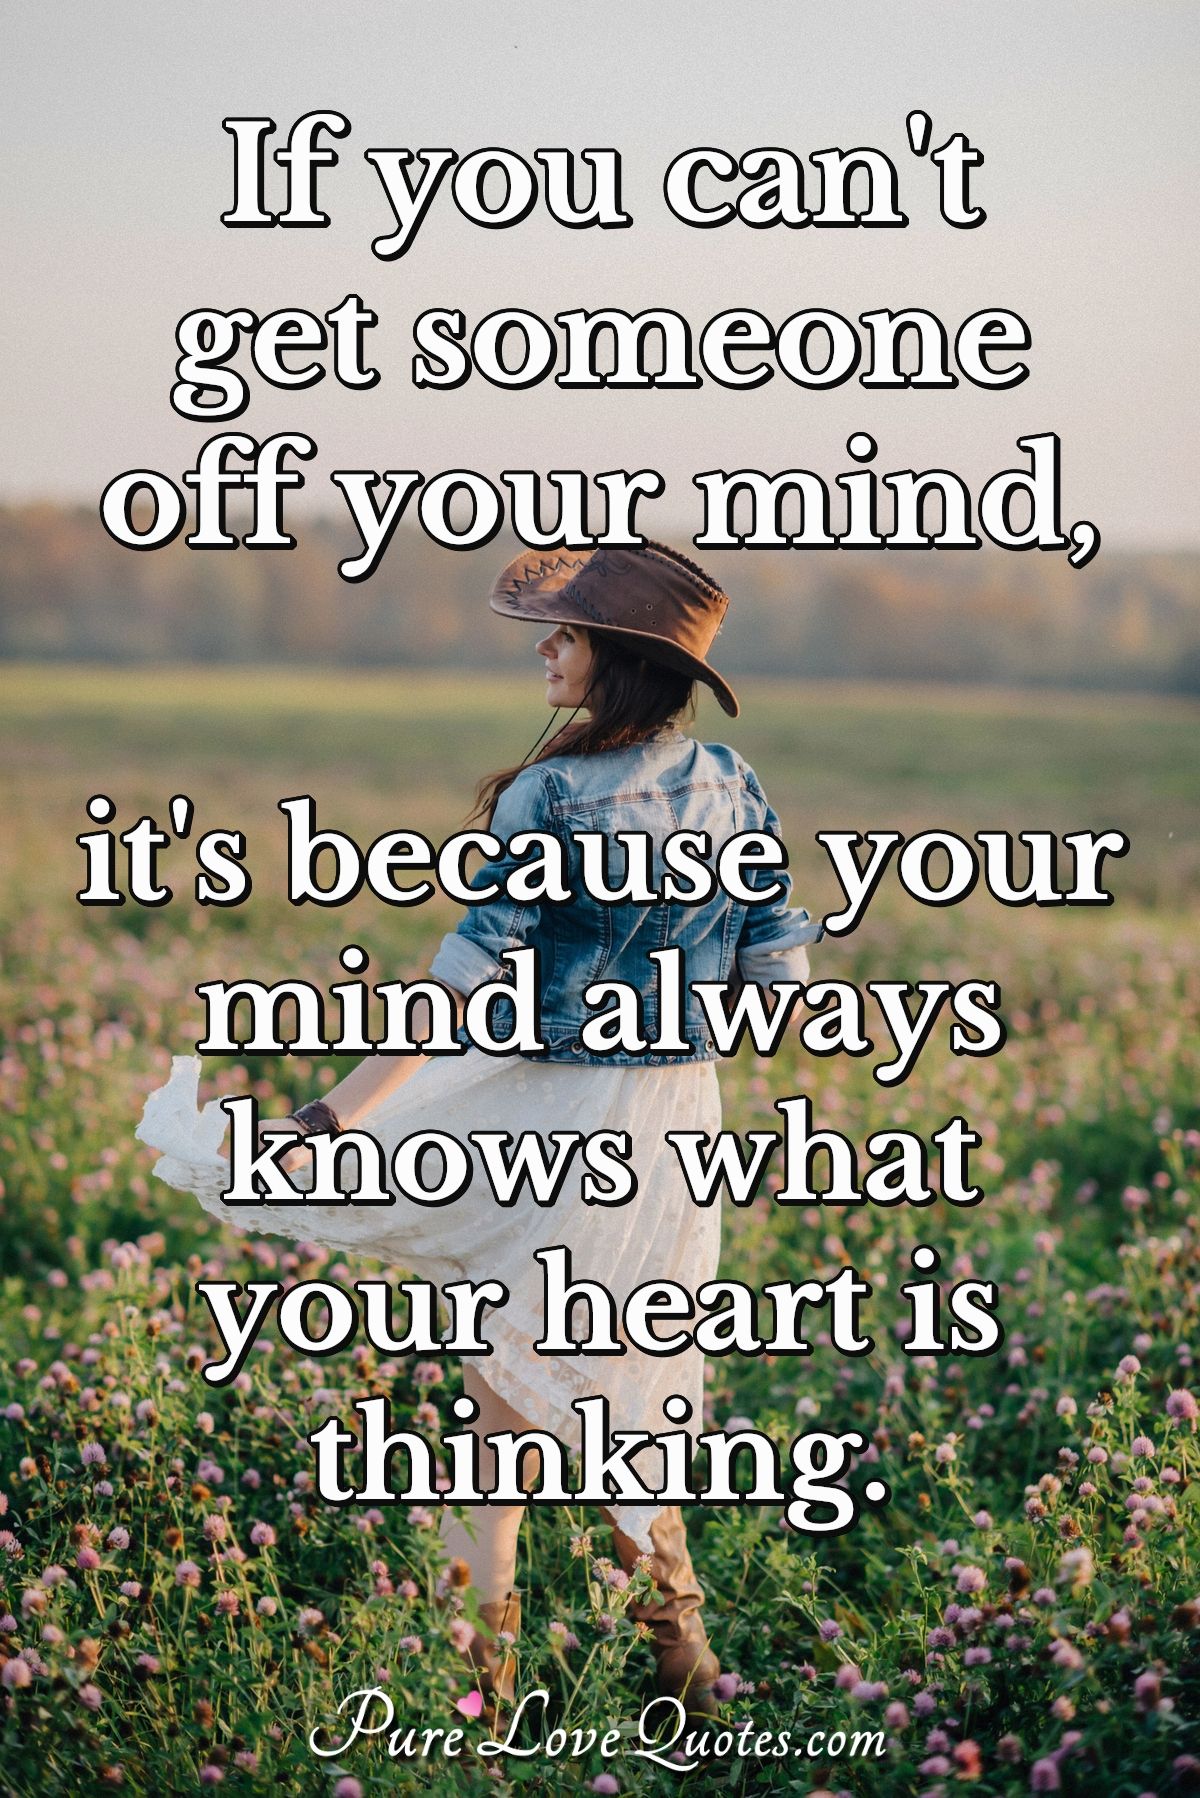 if you can’t get someone off your mind, it’s because your mind always knows what your heart is thinking